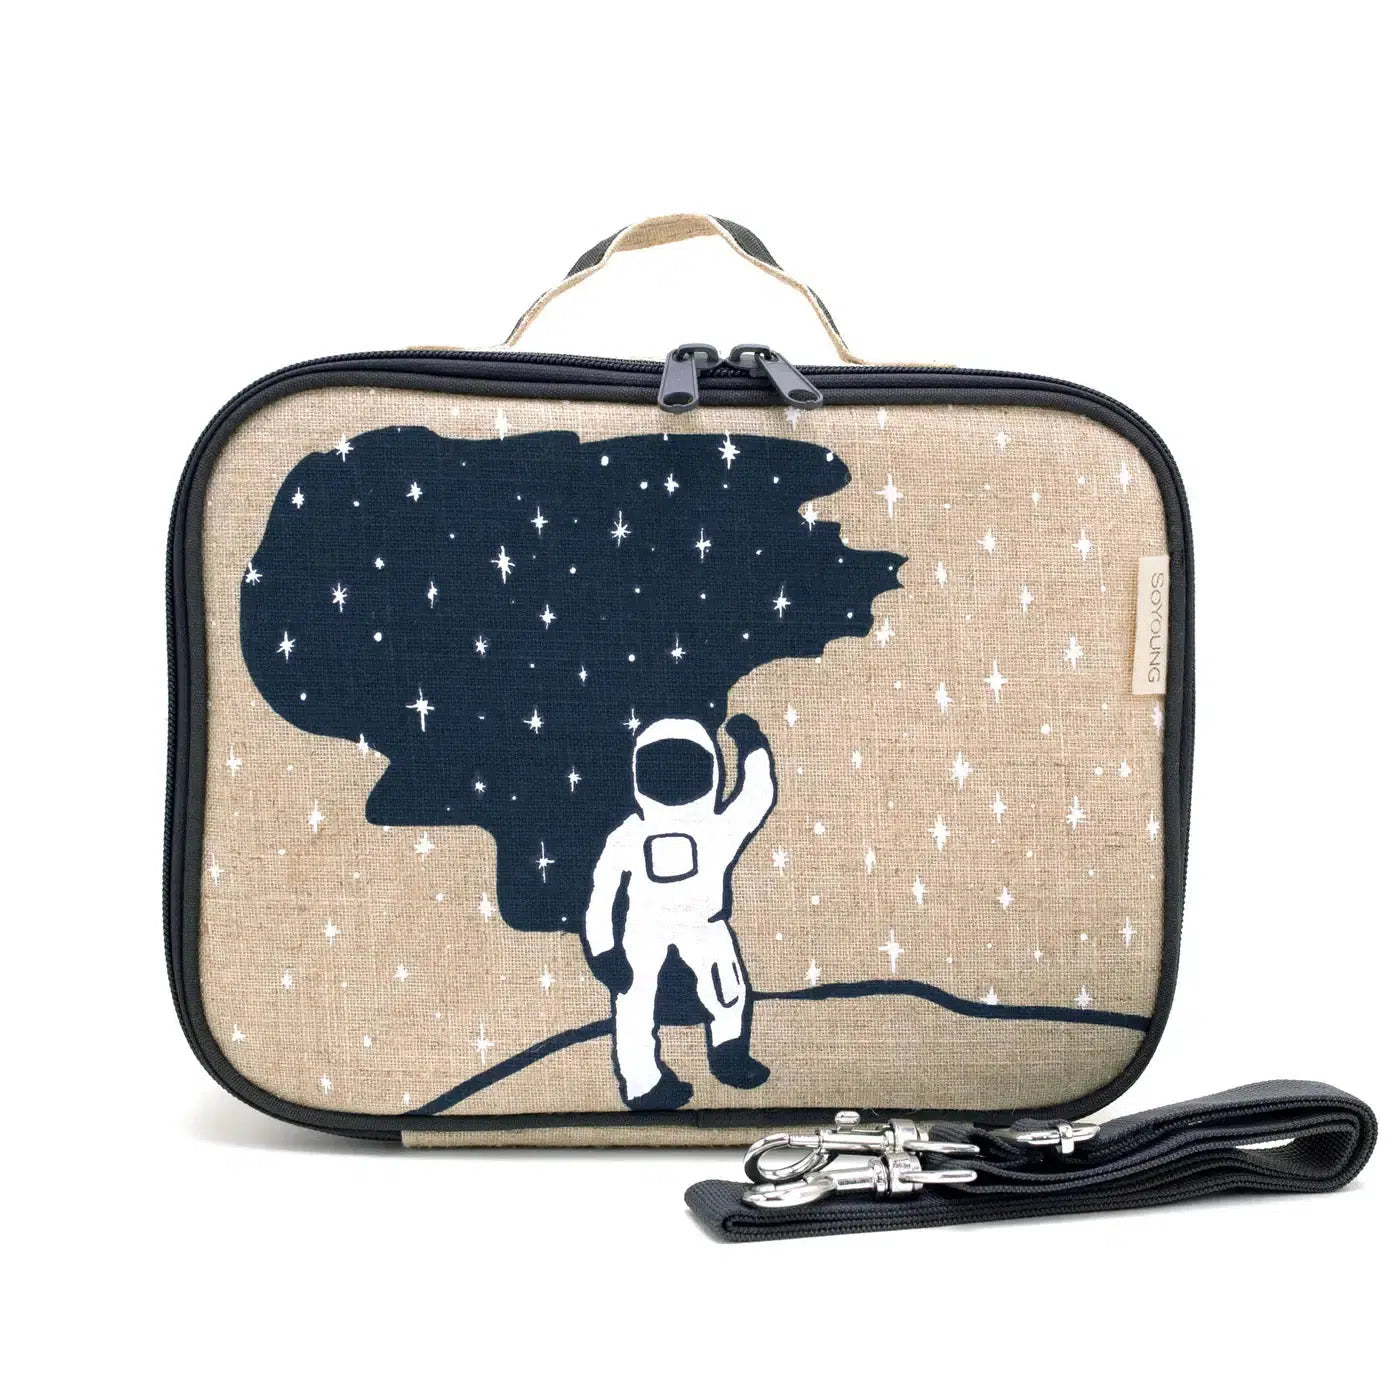 Spaceman Lunch Box by SoYoung Baby and Kids SoYoung Prettycleanshop